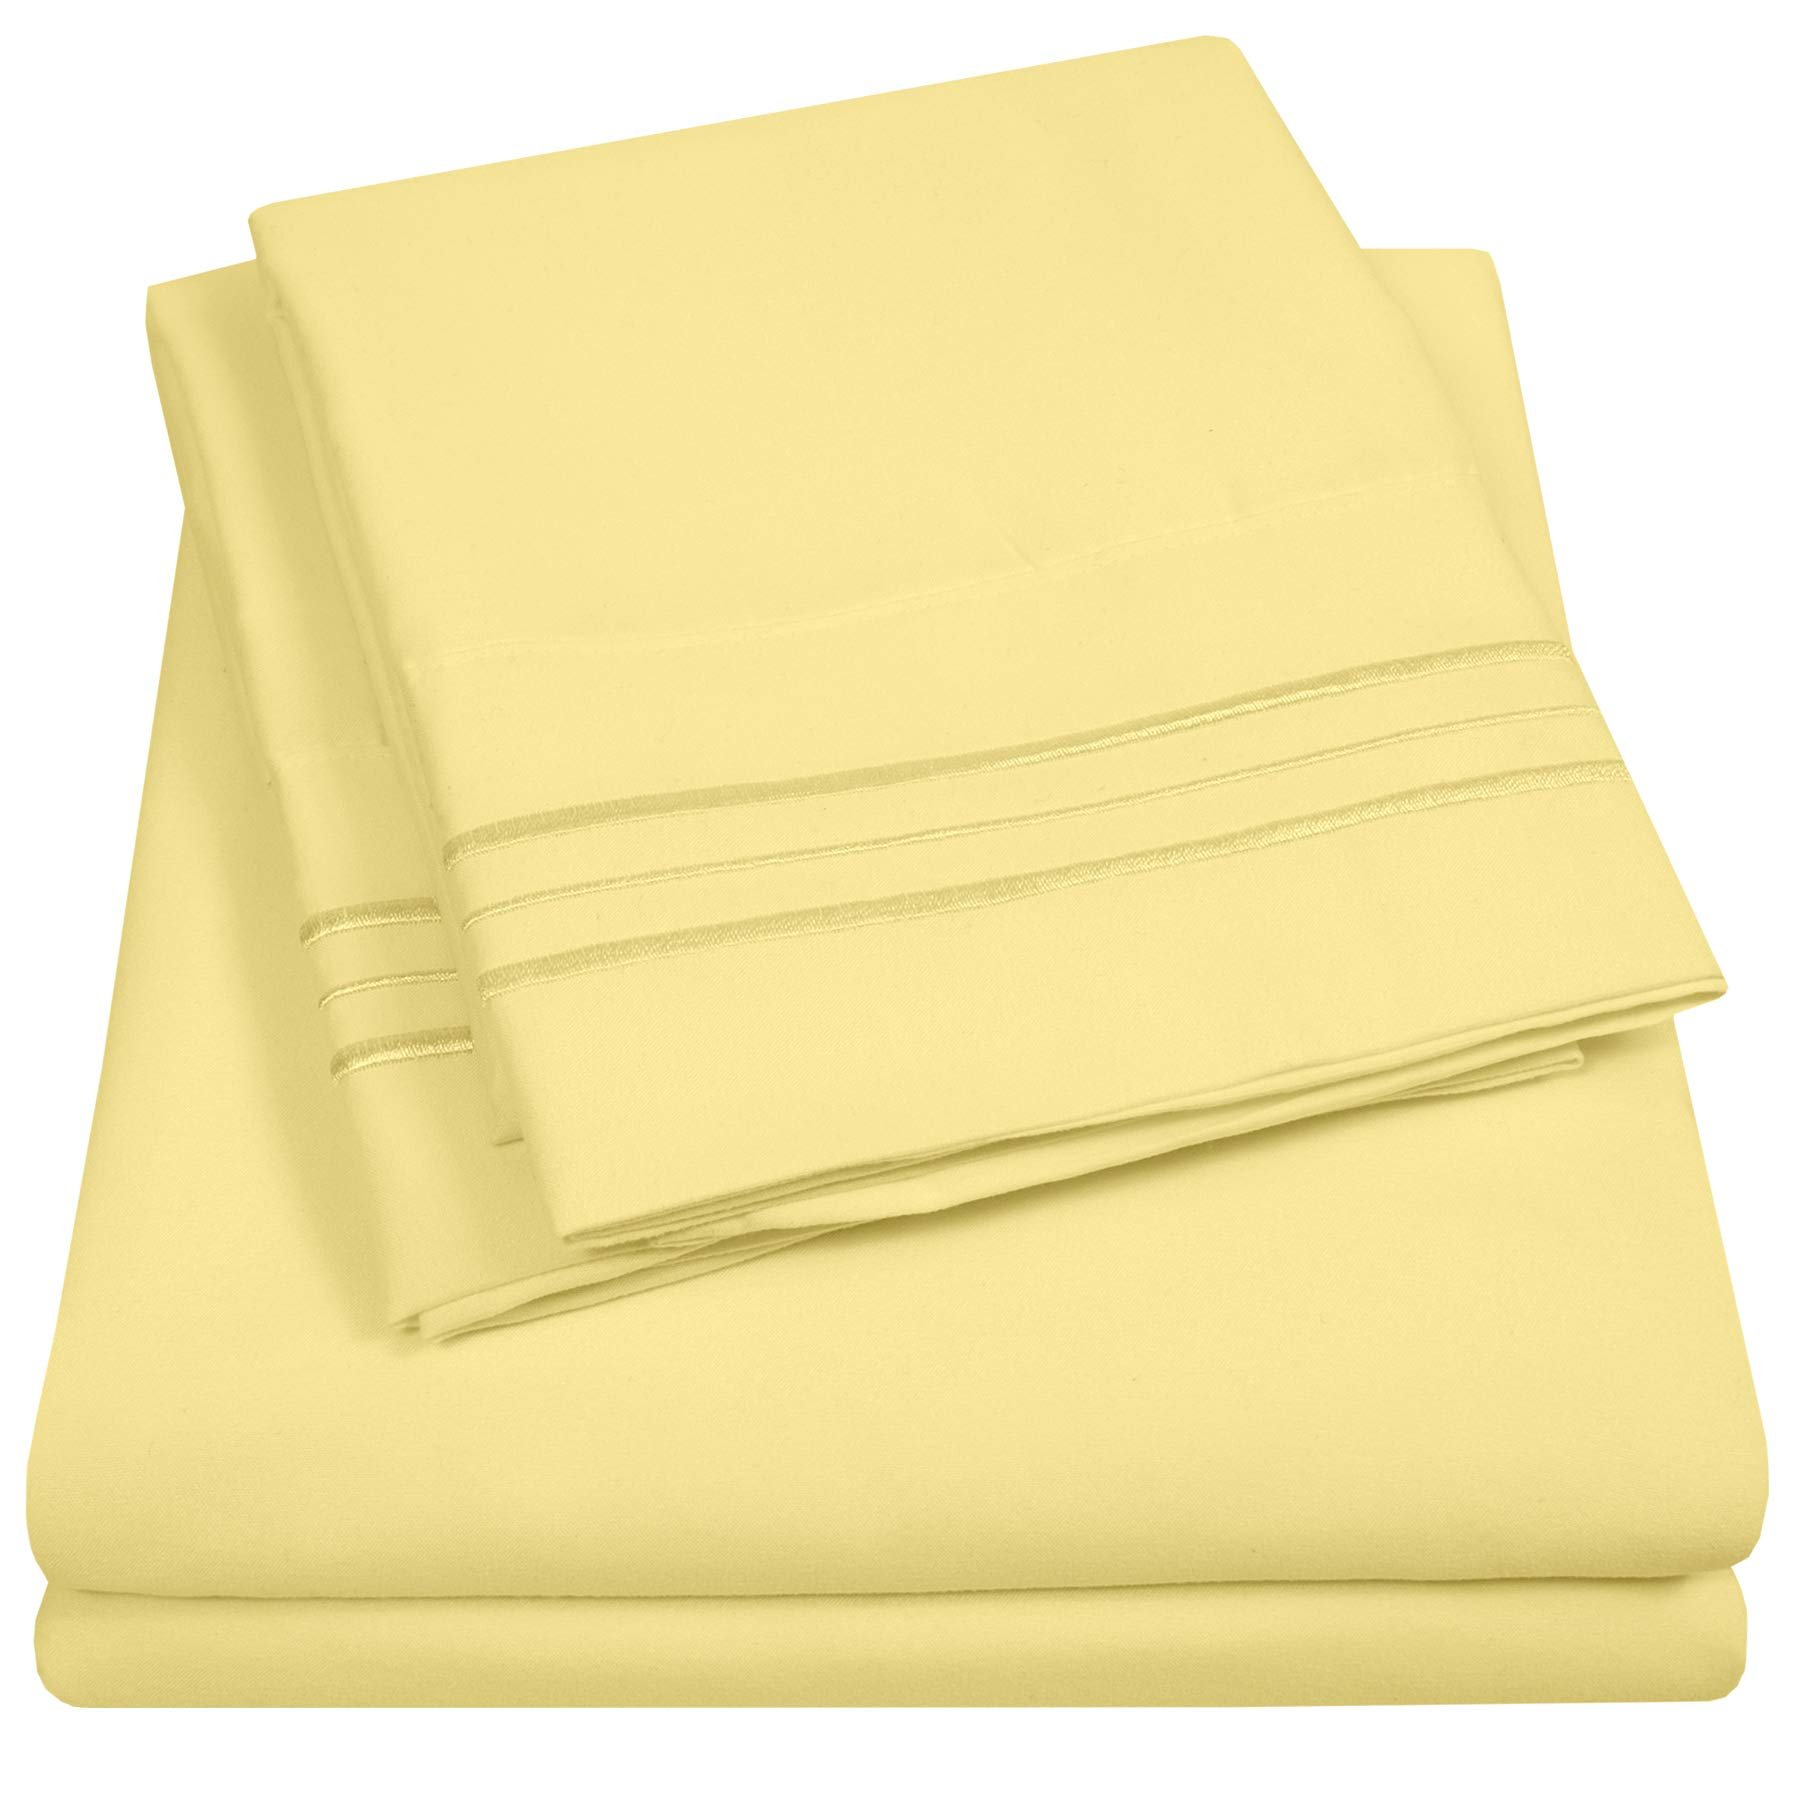 Book Cover 1500 Supreme Collection Extra Soft King Sheet Set, Pale Yellow- Luxury Bed Sheet Set with Deep Pocket Wrinkle Free Bed Sheets, King Size, Pale Yellow